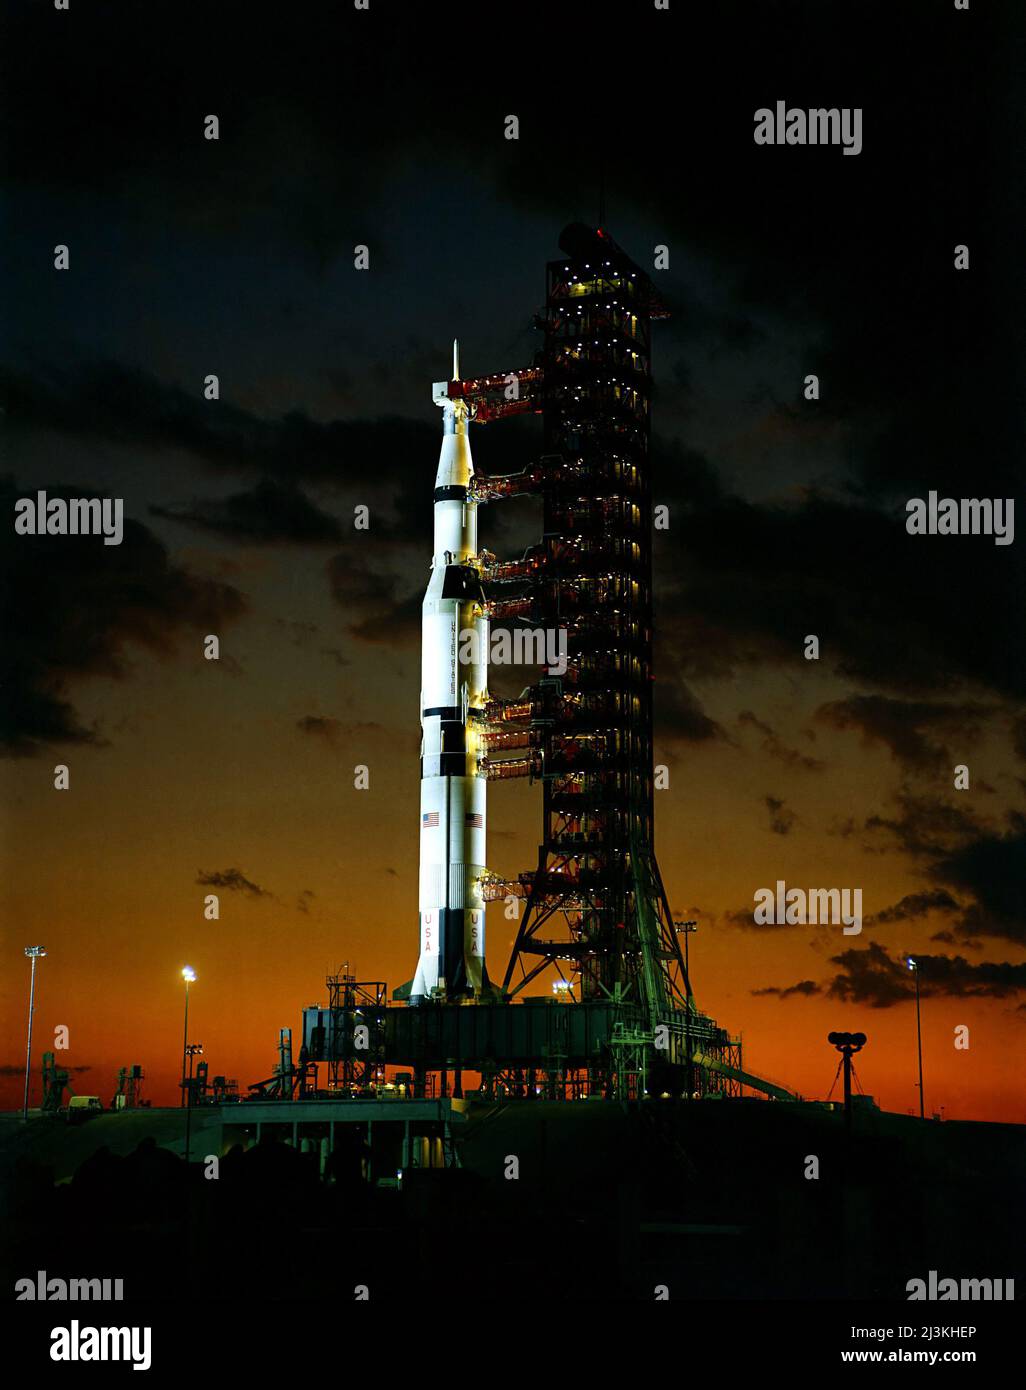 Early morning view of Pad A, Launch Complex 39, Kennedy Space Center, showing Apollo 4 (Spacecraft 017/Saturn 501) prior to launch Stock Photo